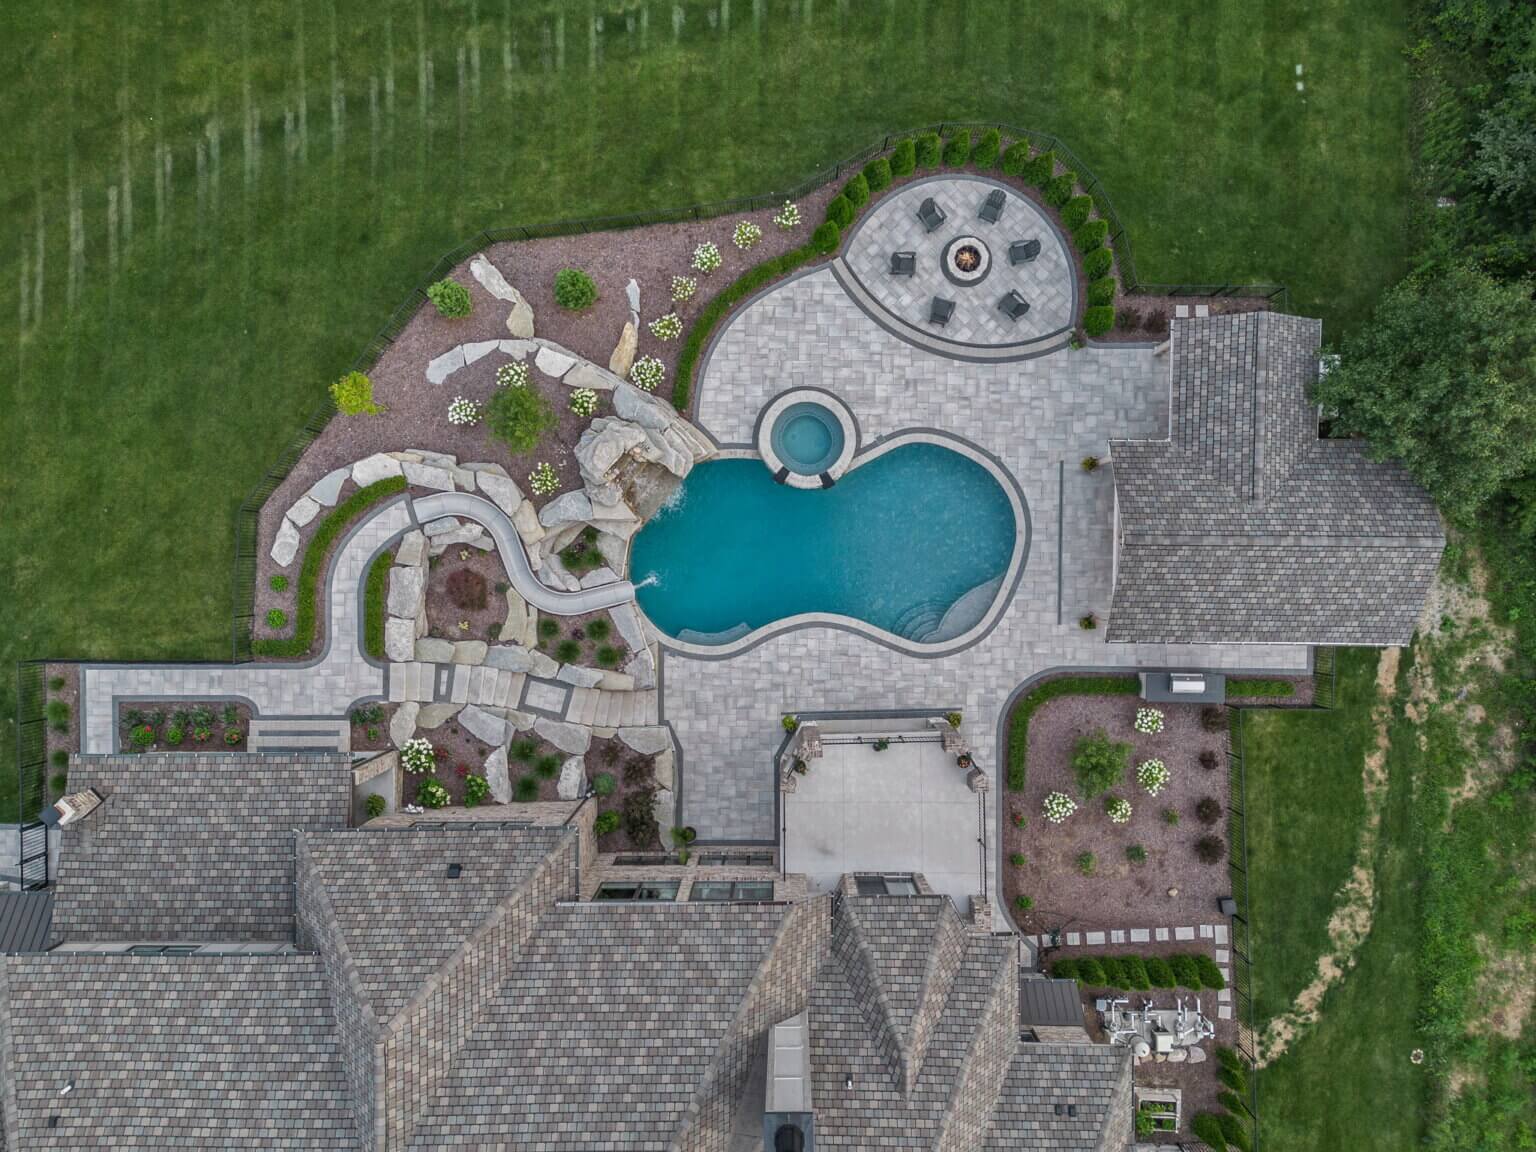 A King's Cove- Antonelli Landscape Pool & Spa Michigan pool builders pool architects residential landscaping landscape design